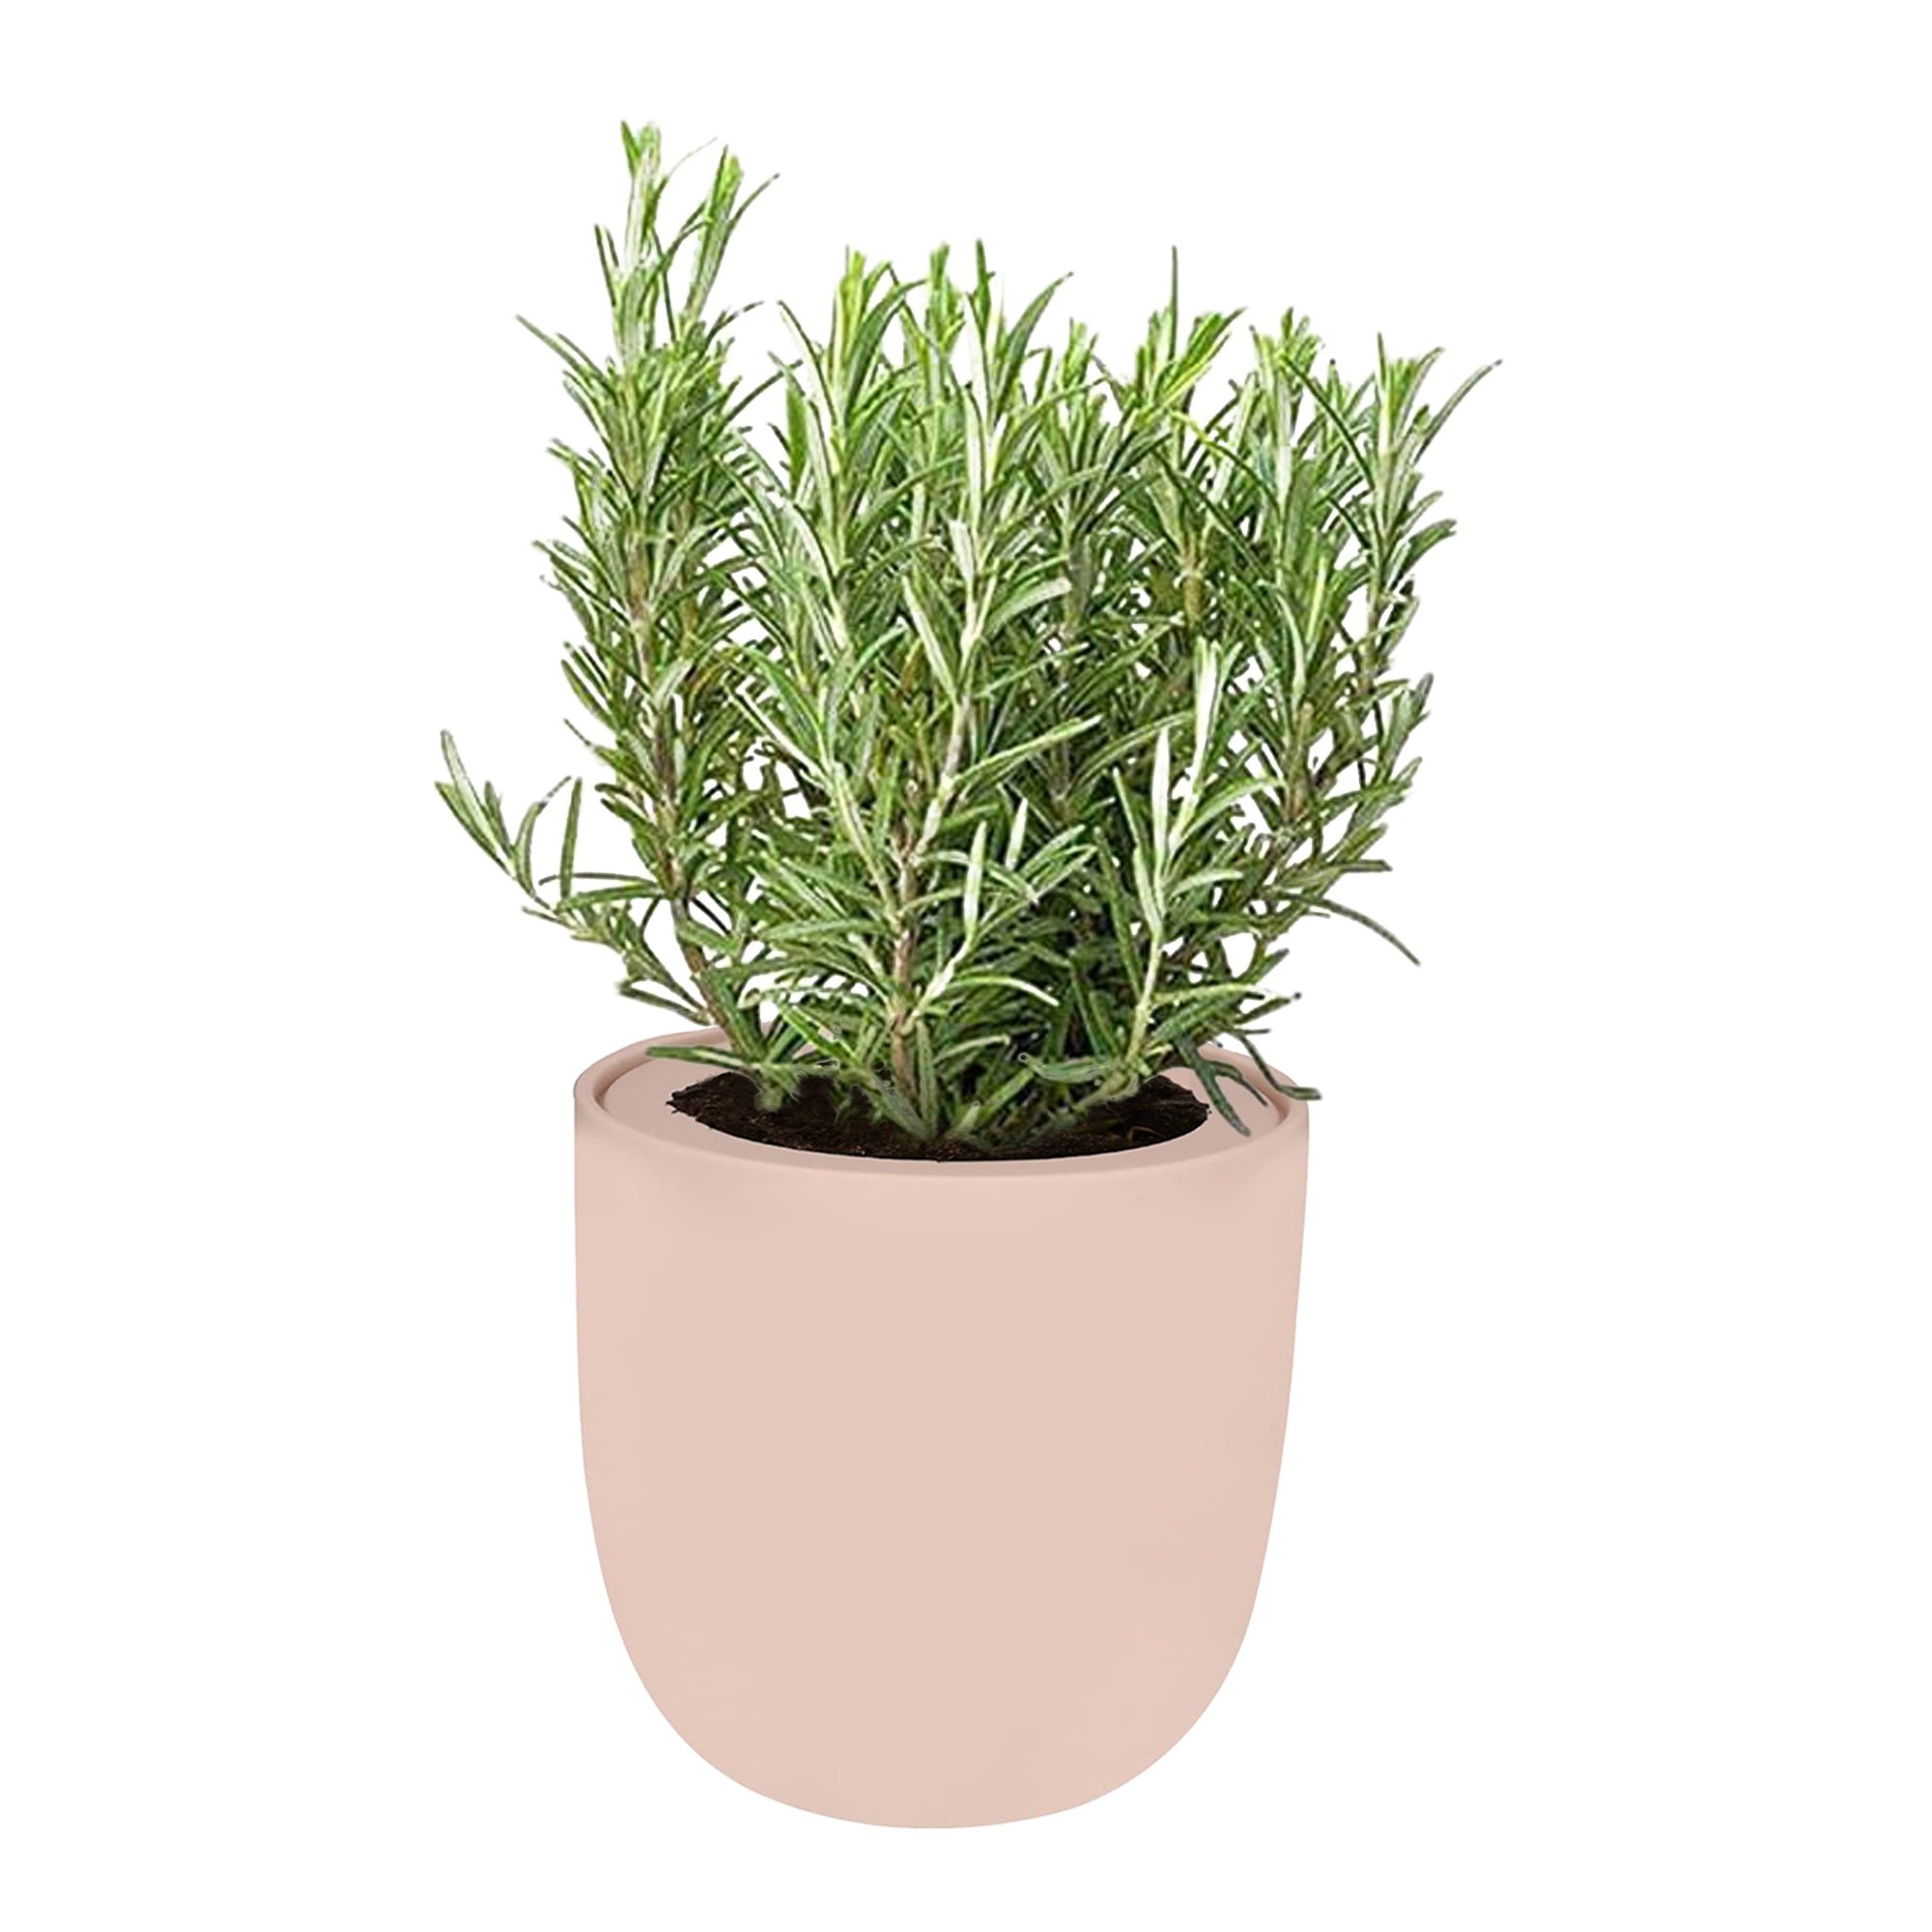 Rosemary Pink Ceramic Pot Hydroponic Growing Kit with Seeds